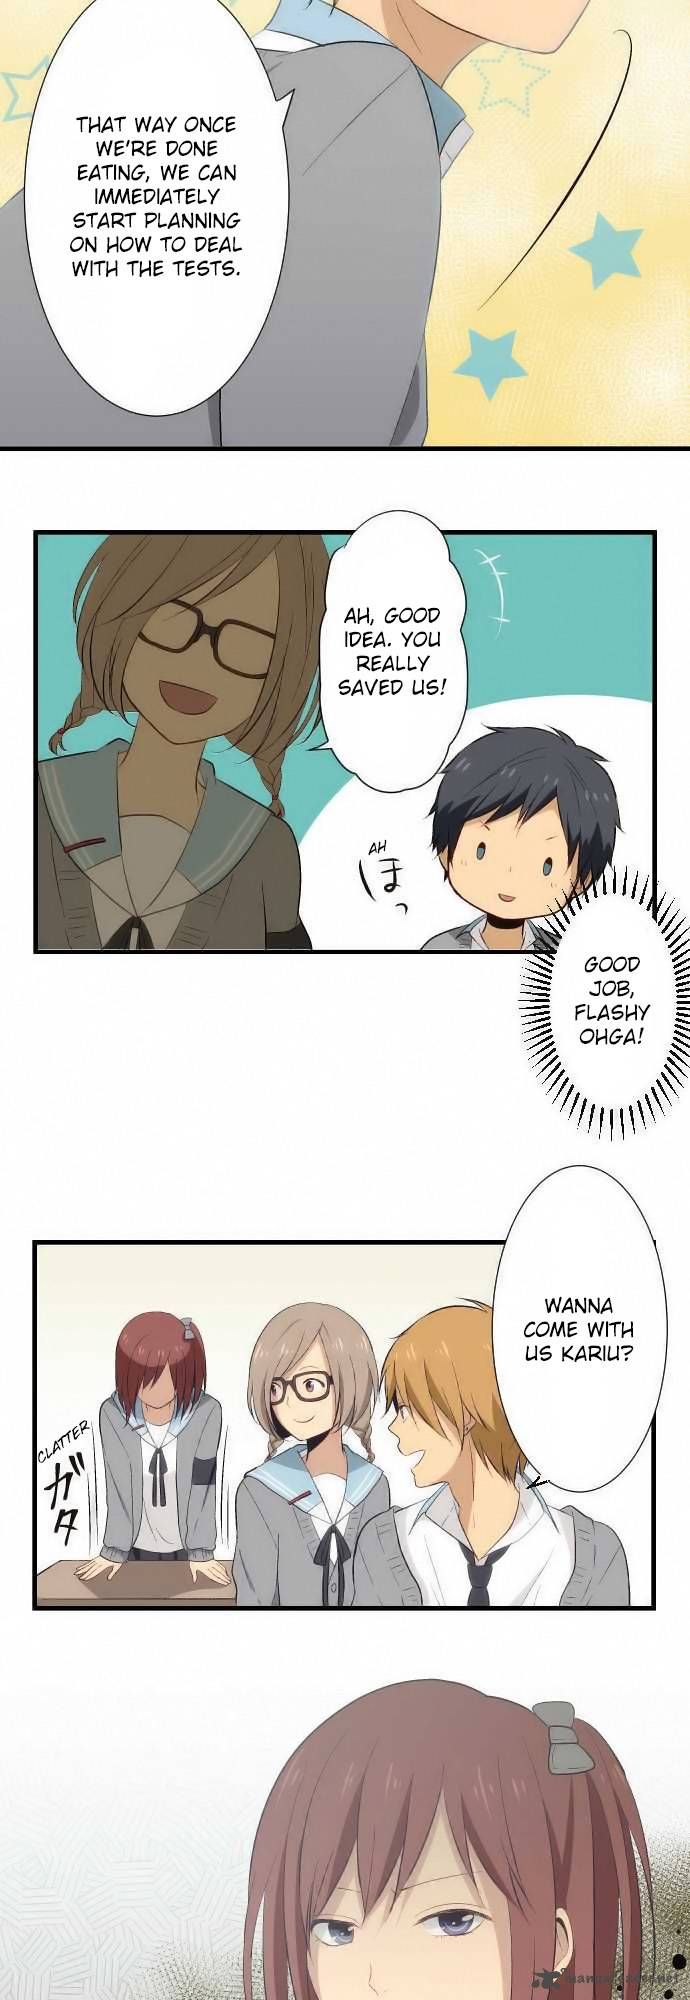 ReLIFE 22